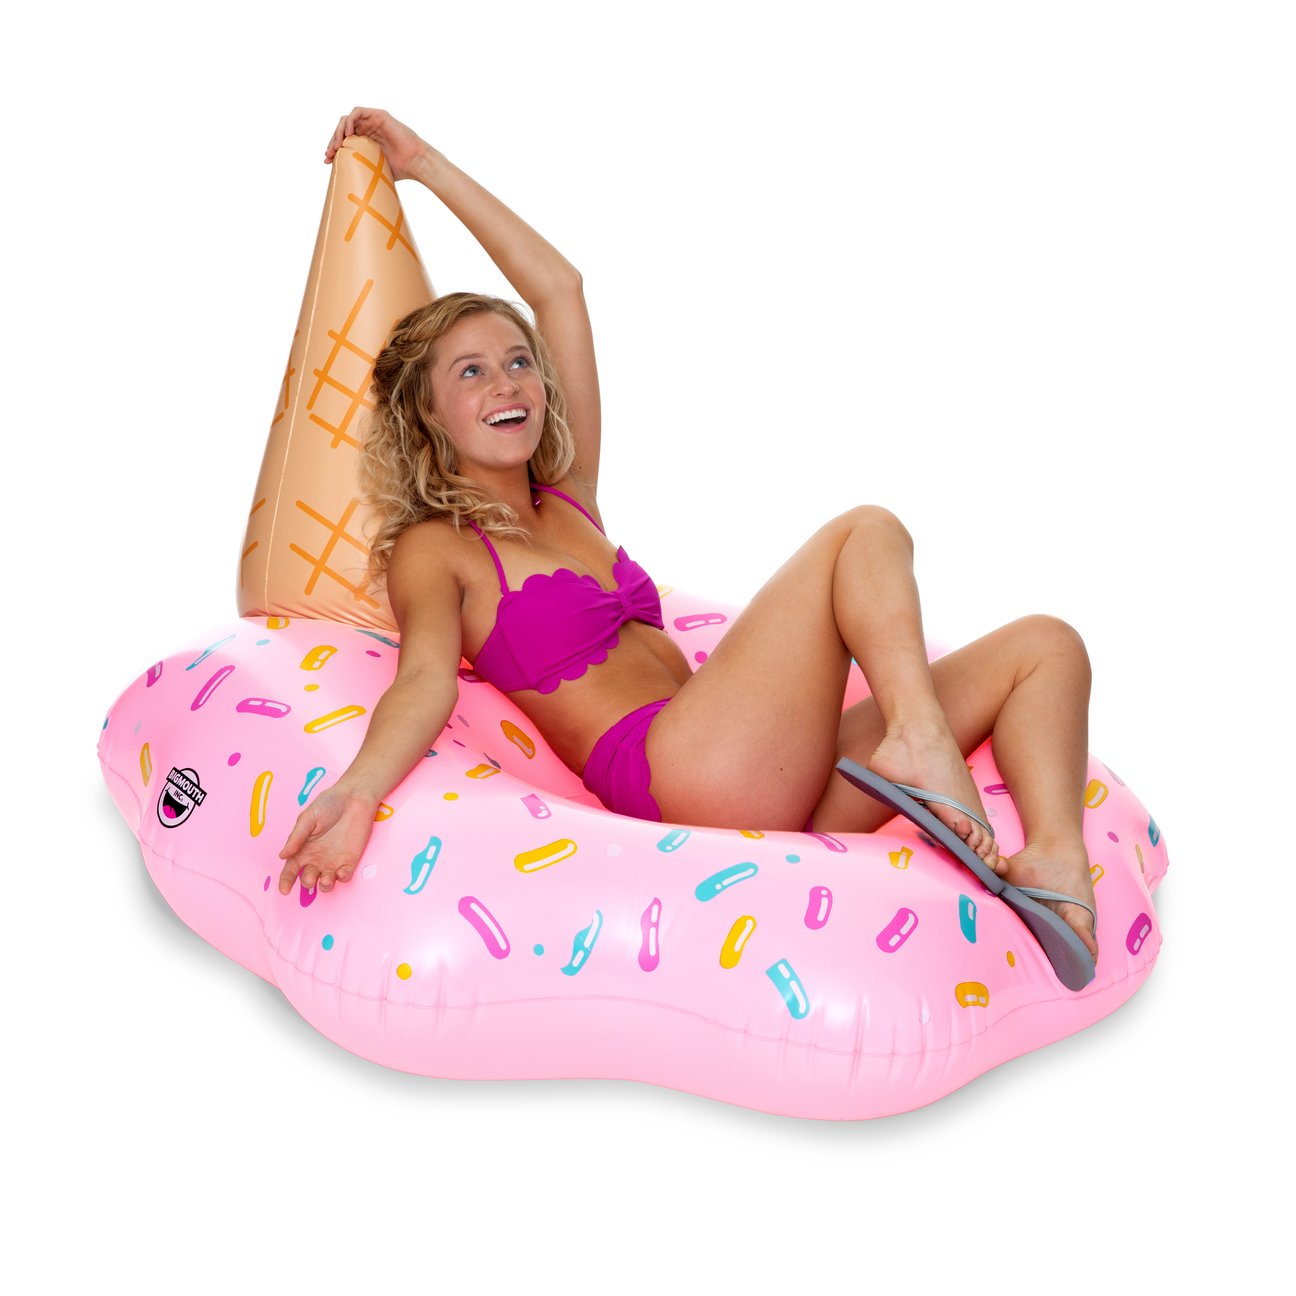 Melted Ice Cream Pool Float